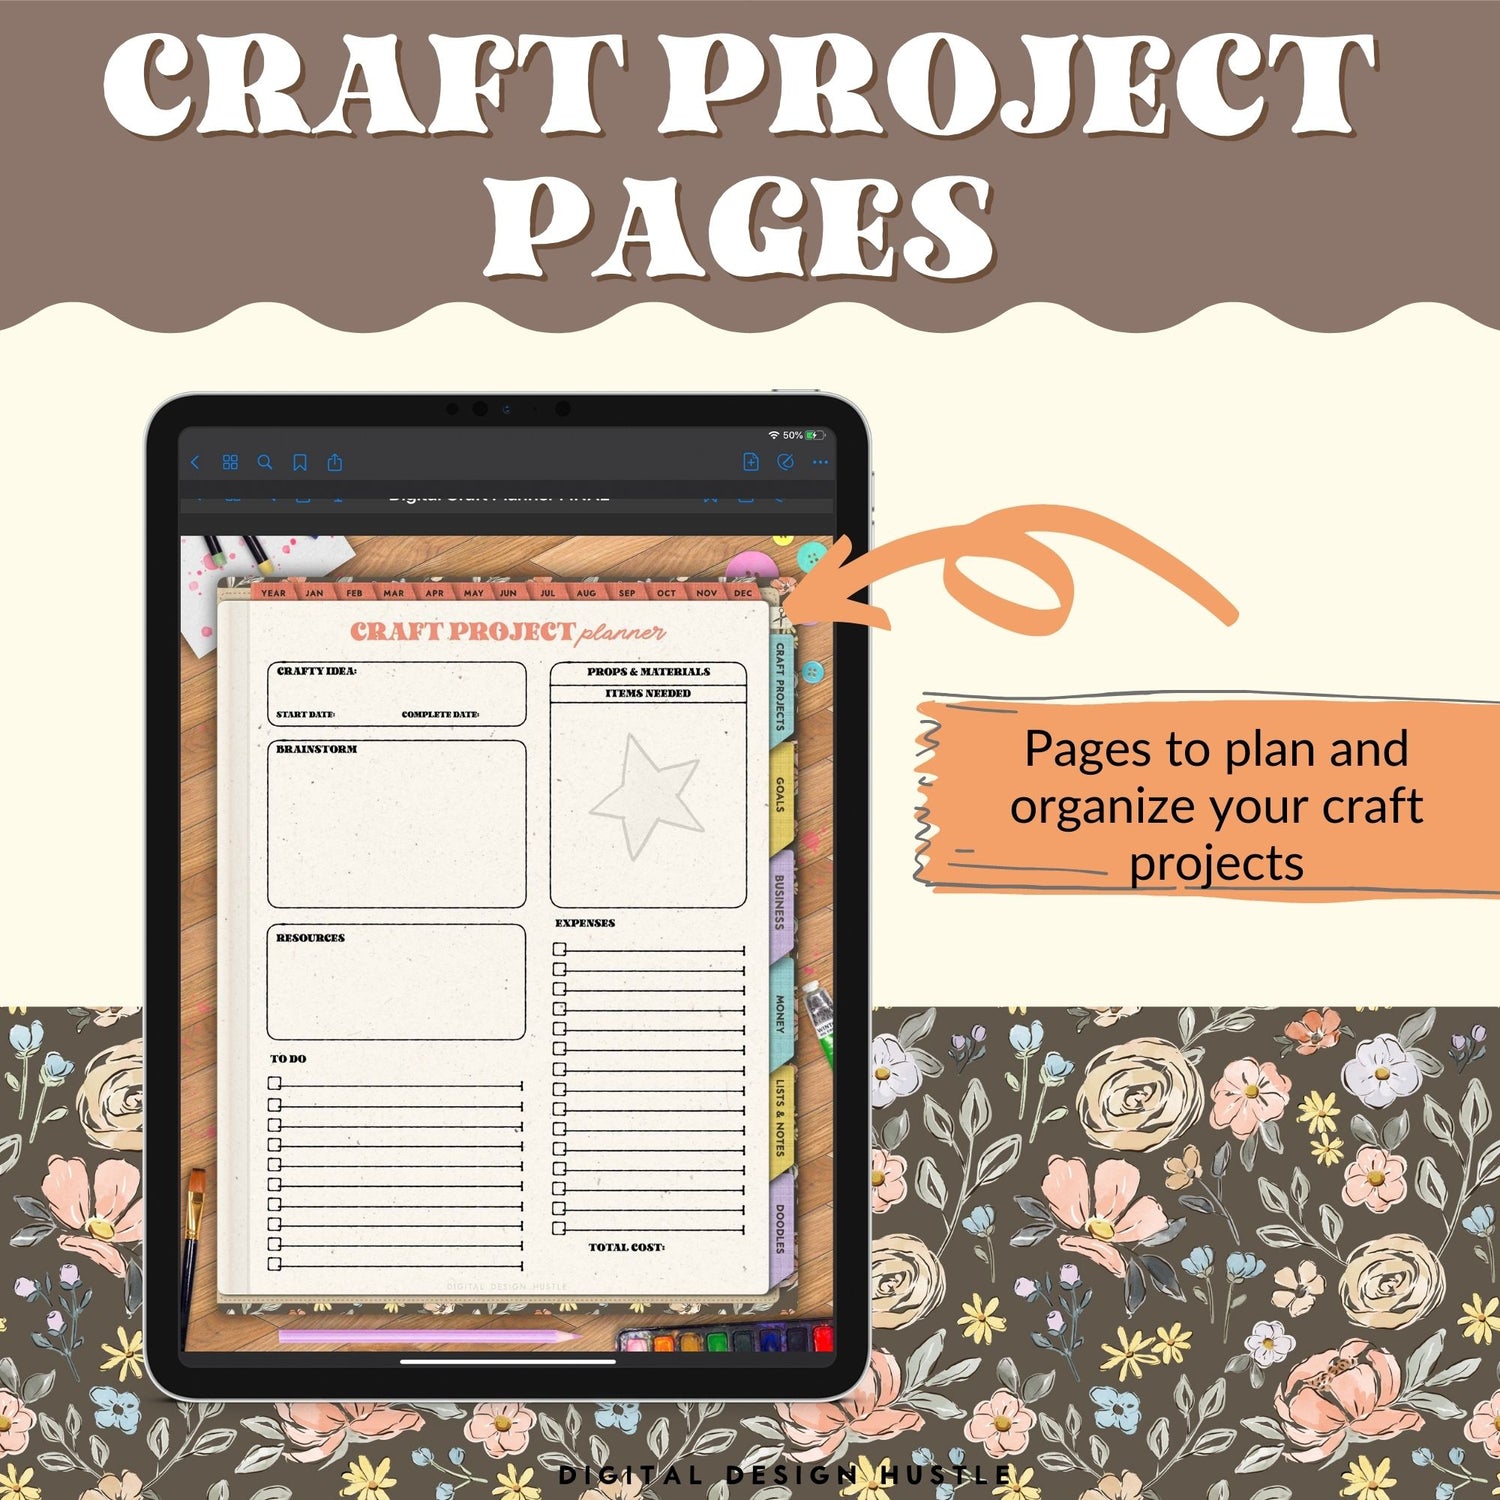 Plan out all of your craft projects quickly and efficiently with this 615-page Digital Craft Planner. 19 Sections to manage all of your craft projects, sewing projects, knitting projects, scrapbooking and more including Schedule, Projects, Money, Business, Lists, and Doodles plus 625 matching digital stickers.